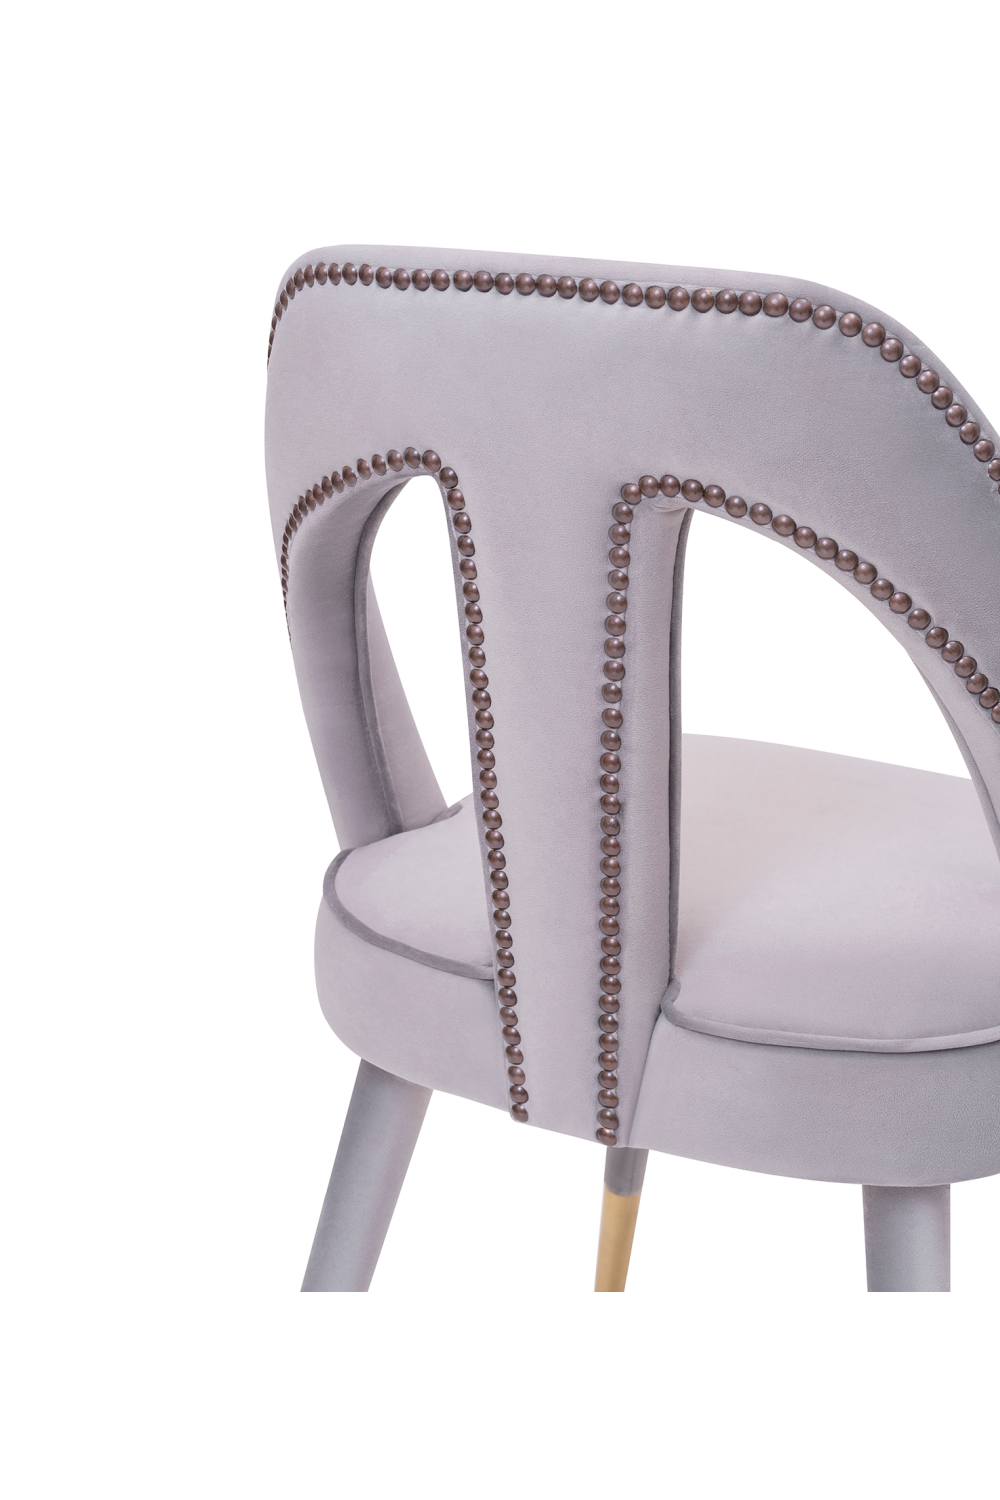 Cut-Out Backrest Dining Chair | Liang and Eimil Pigalle | OROA